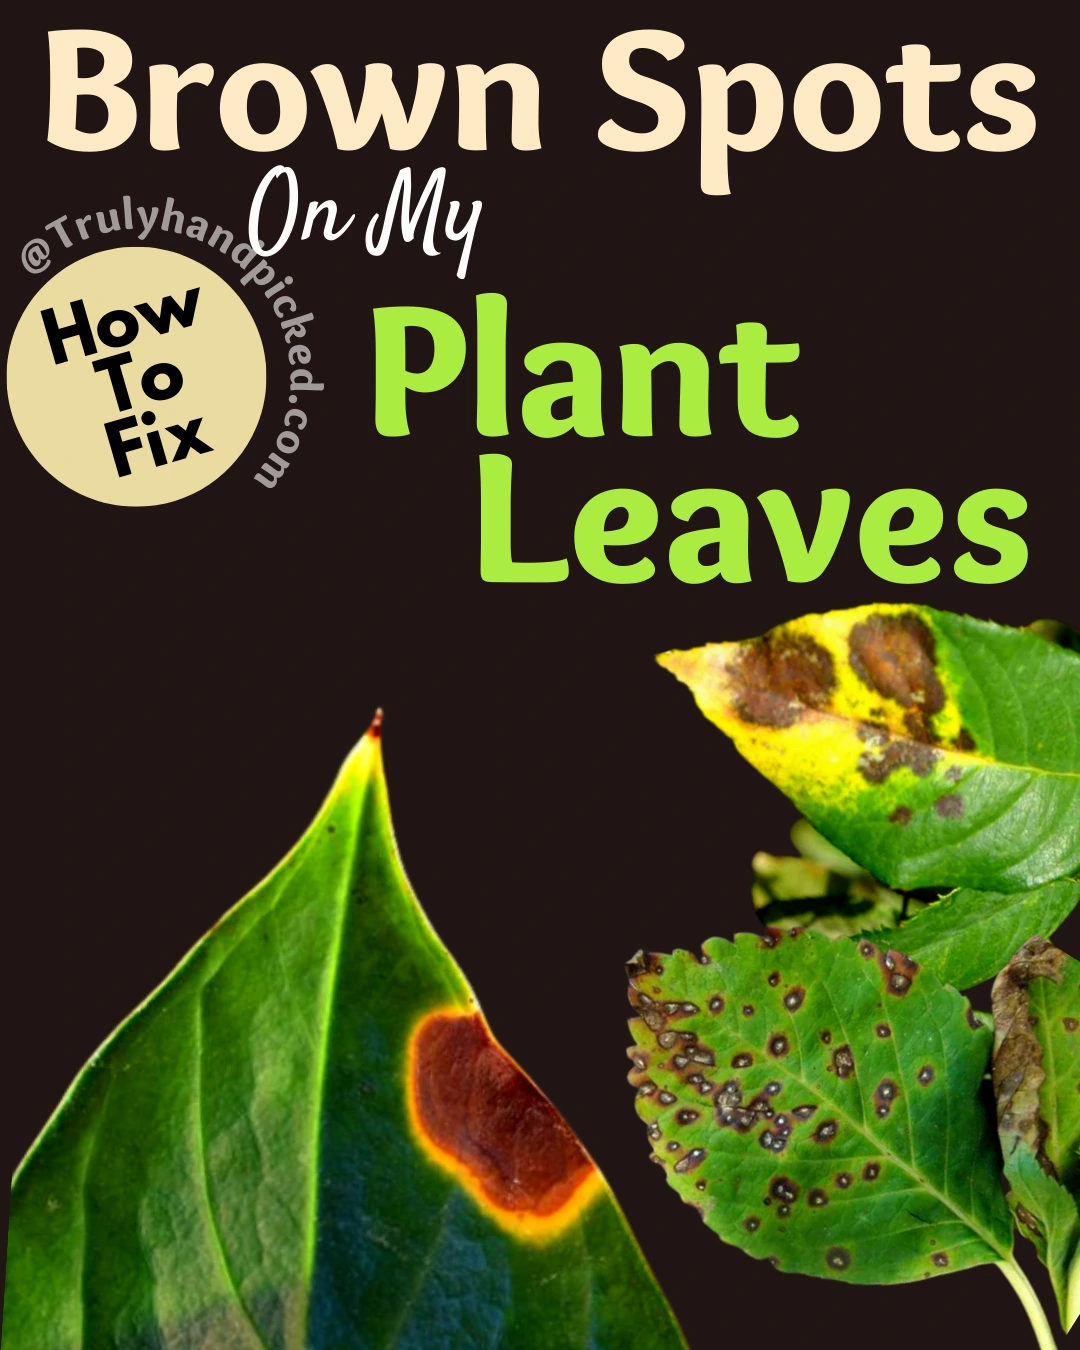 How to fix brown spots on my plant leaves